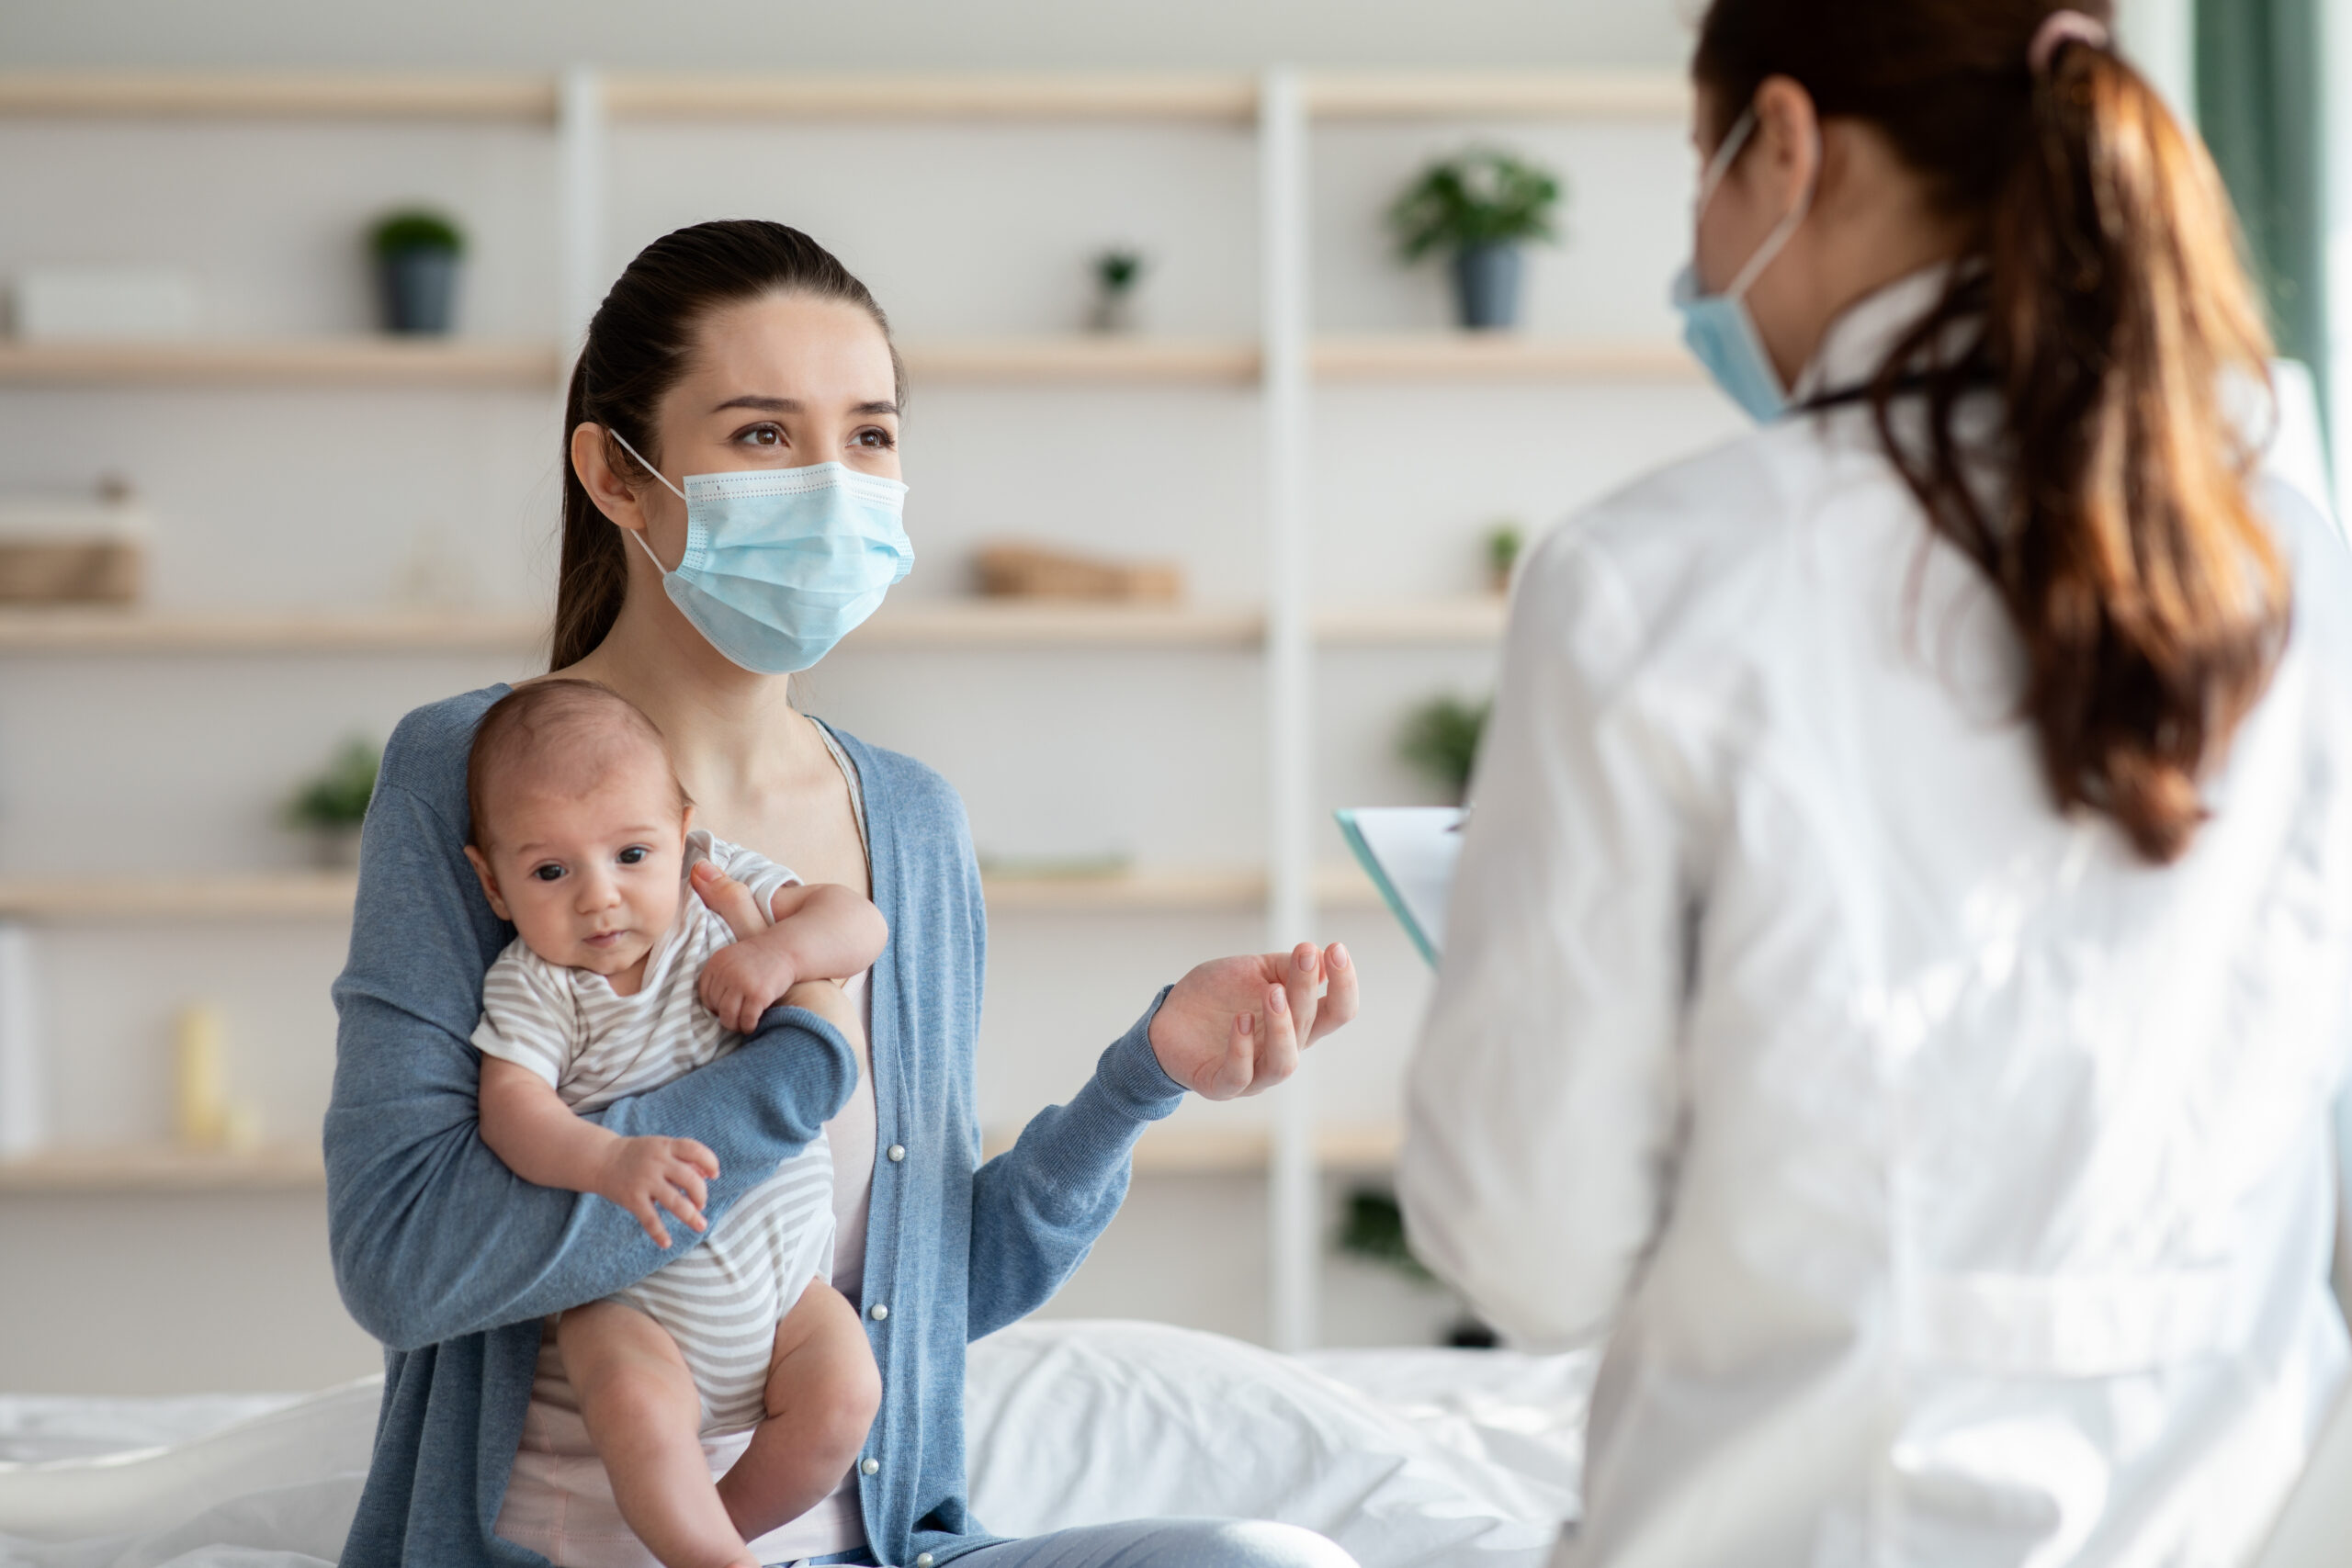 Woman holding her baby at the doctor with a mask